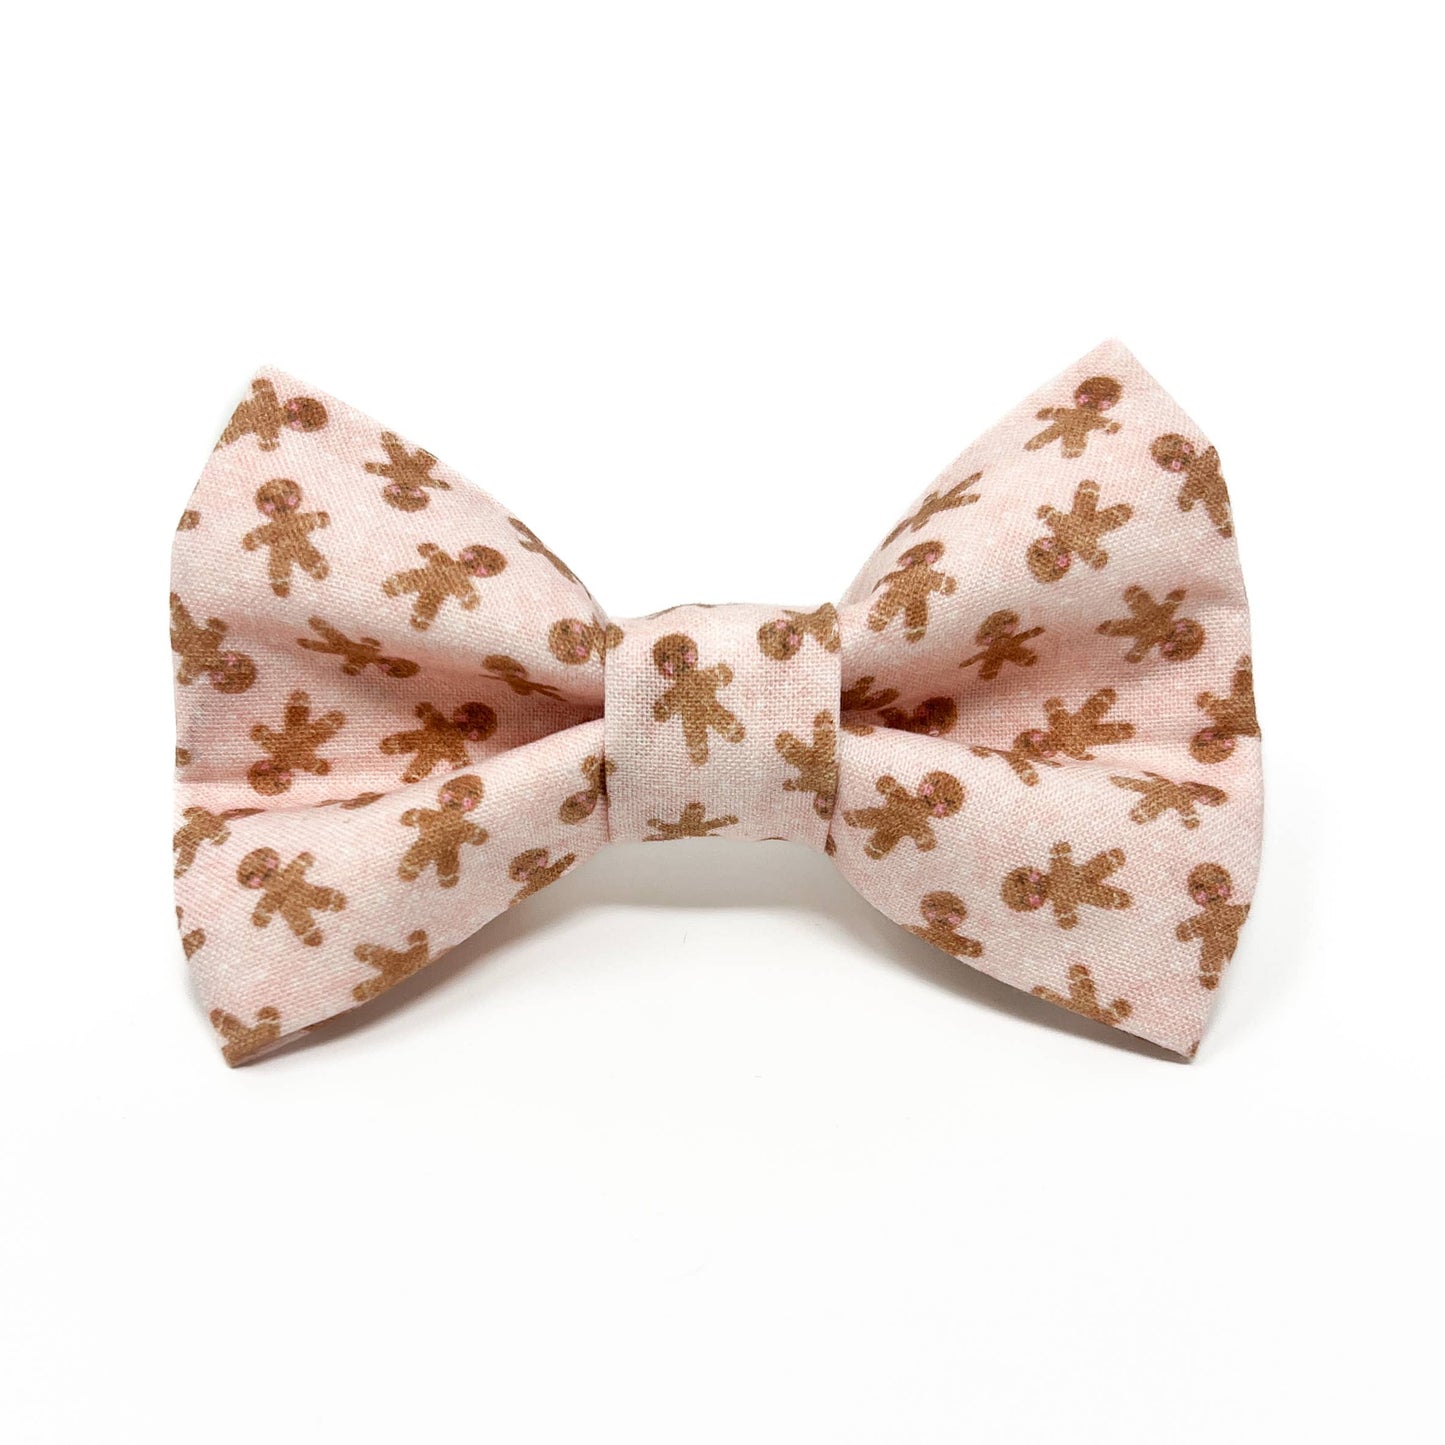 Gingerbread Men Cookies Dog Bow Tie for Christmas